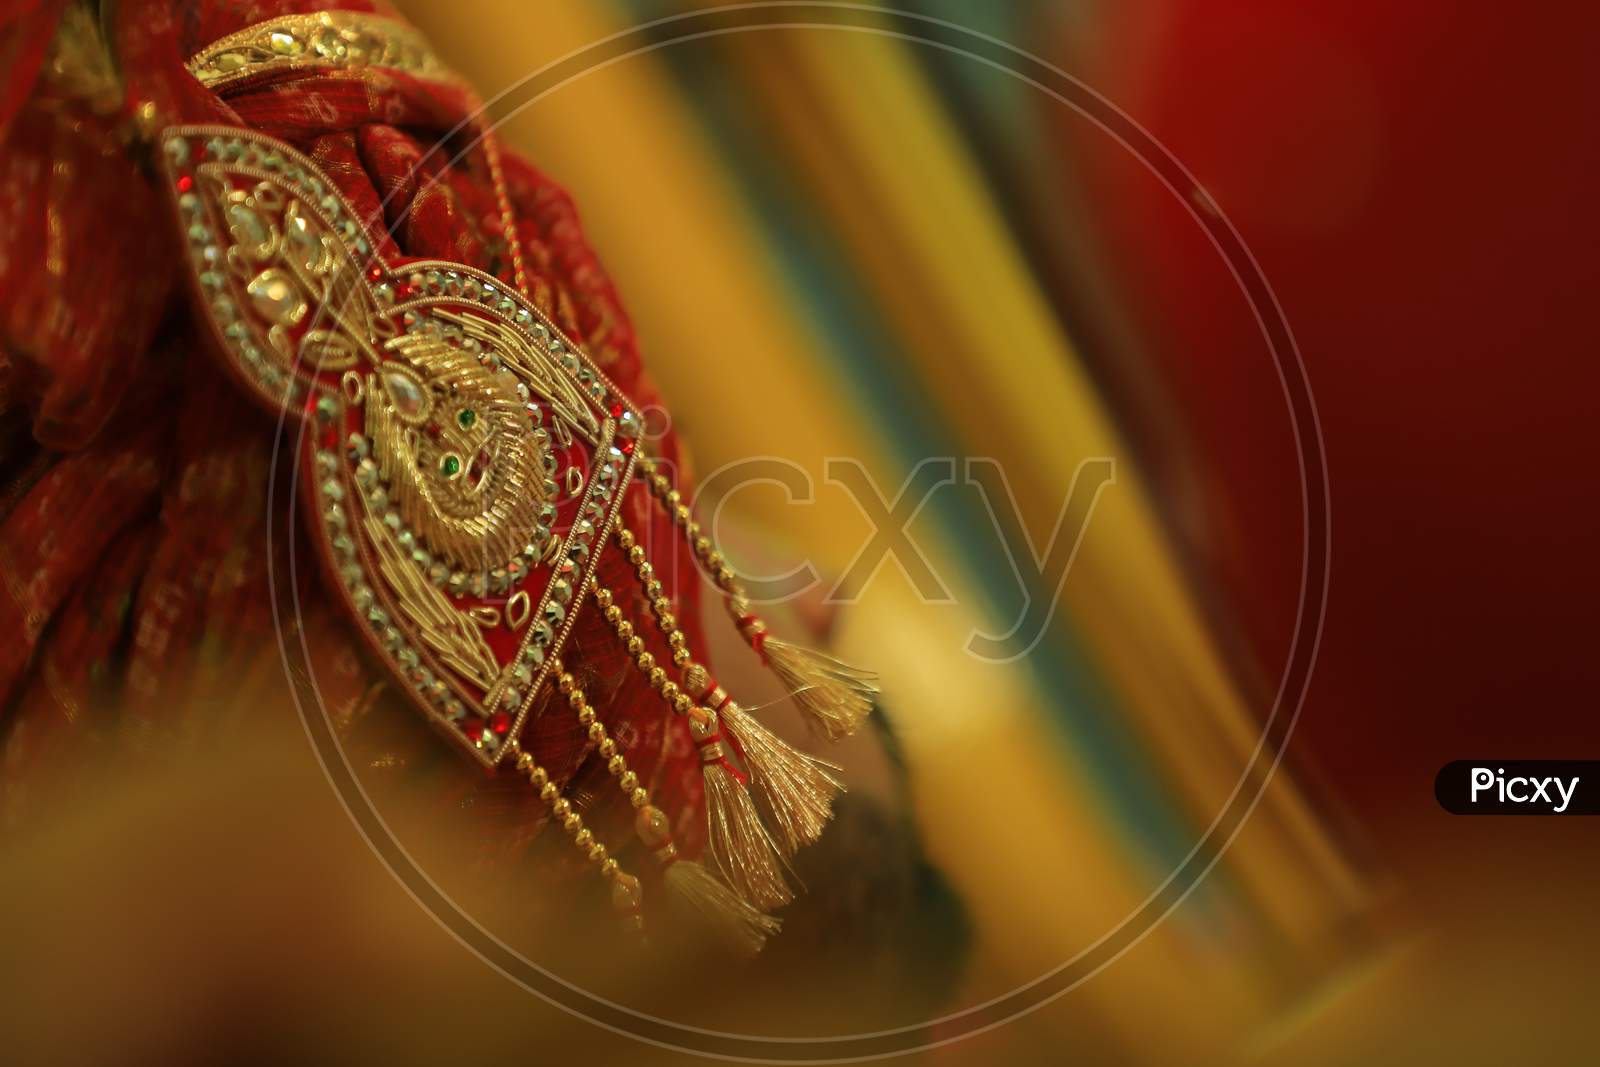 Traditional Rituals At an Indian Wedding